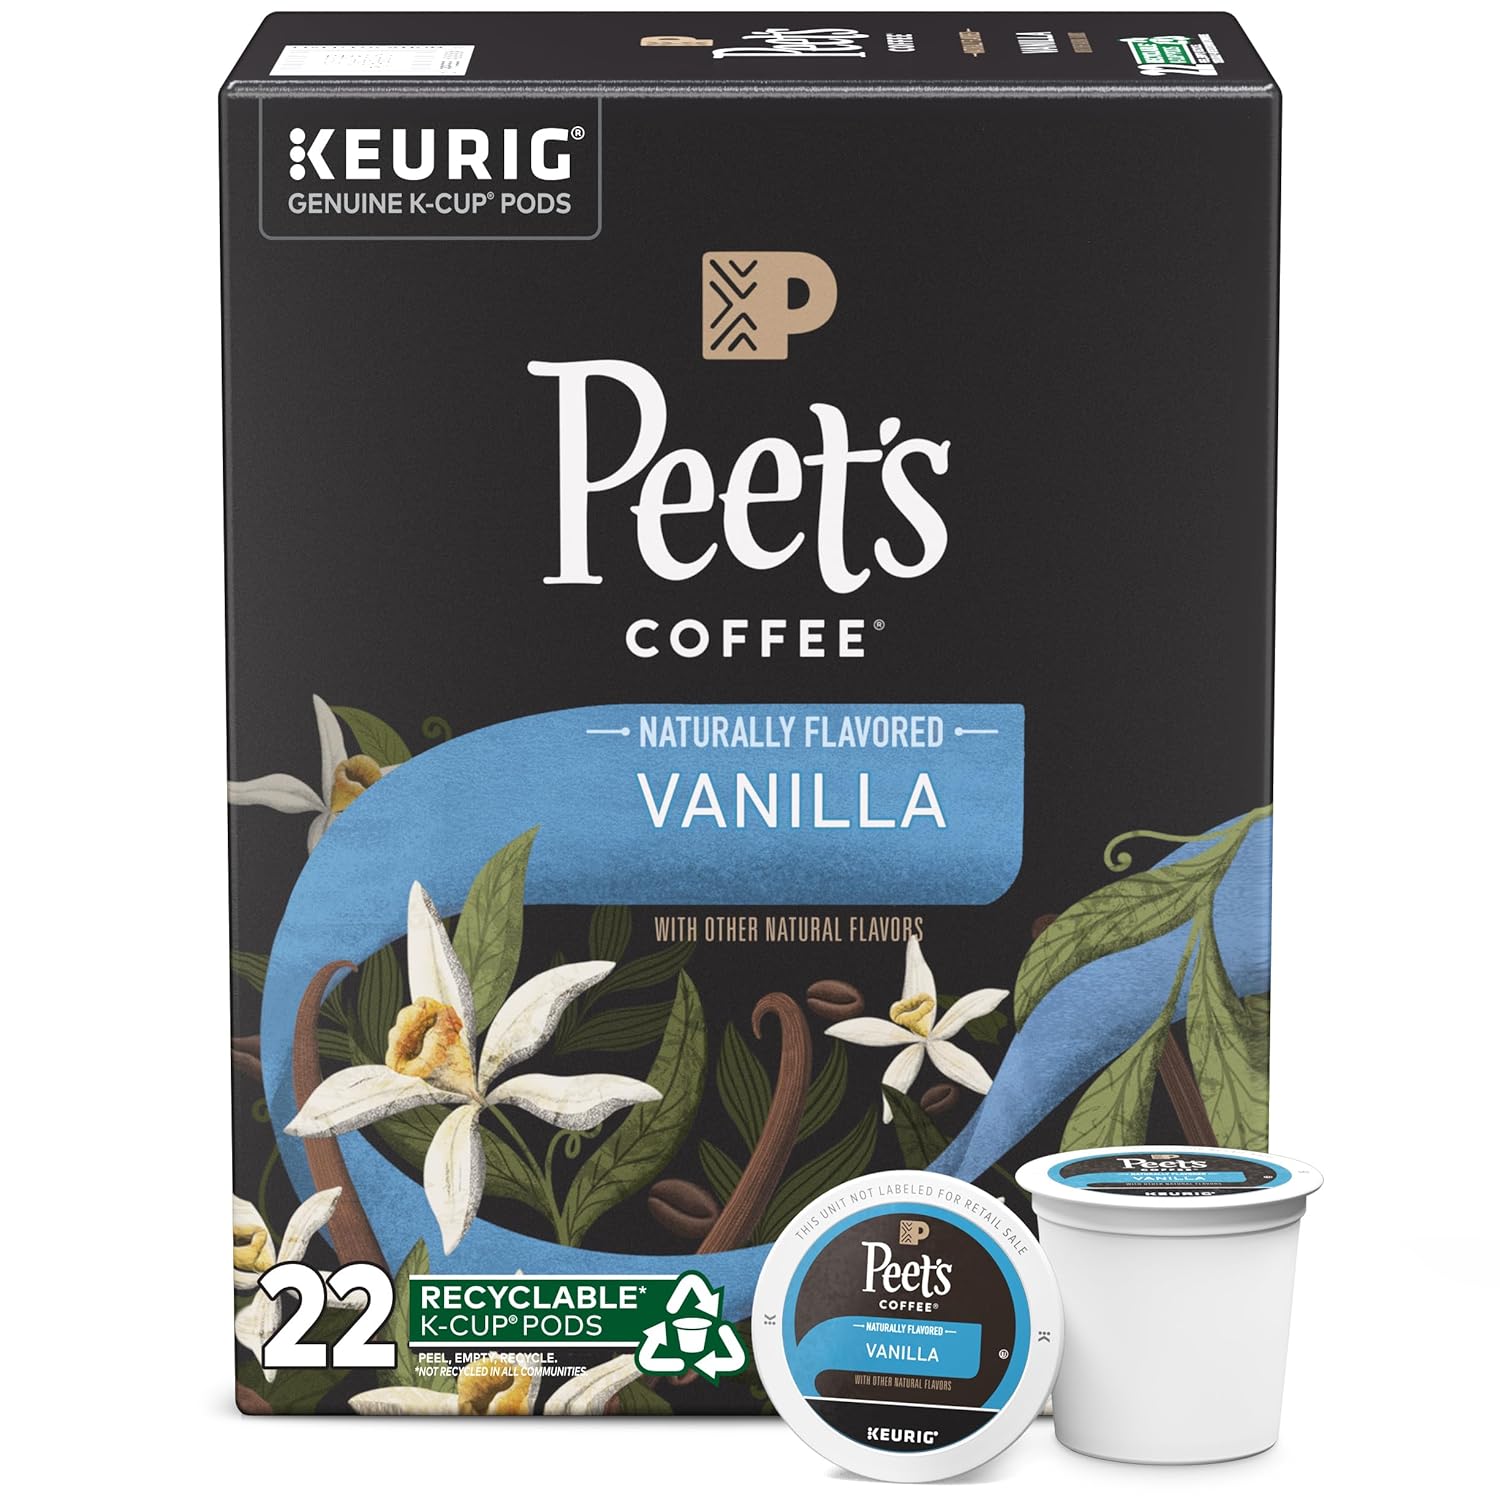 Peet's Coffee, Flavored Coffee K-Cup Pods for Keurig Brewers - Vanilla 22 Count (1 Box of 22 K-Cup Pods)